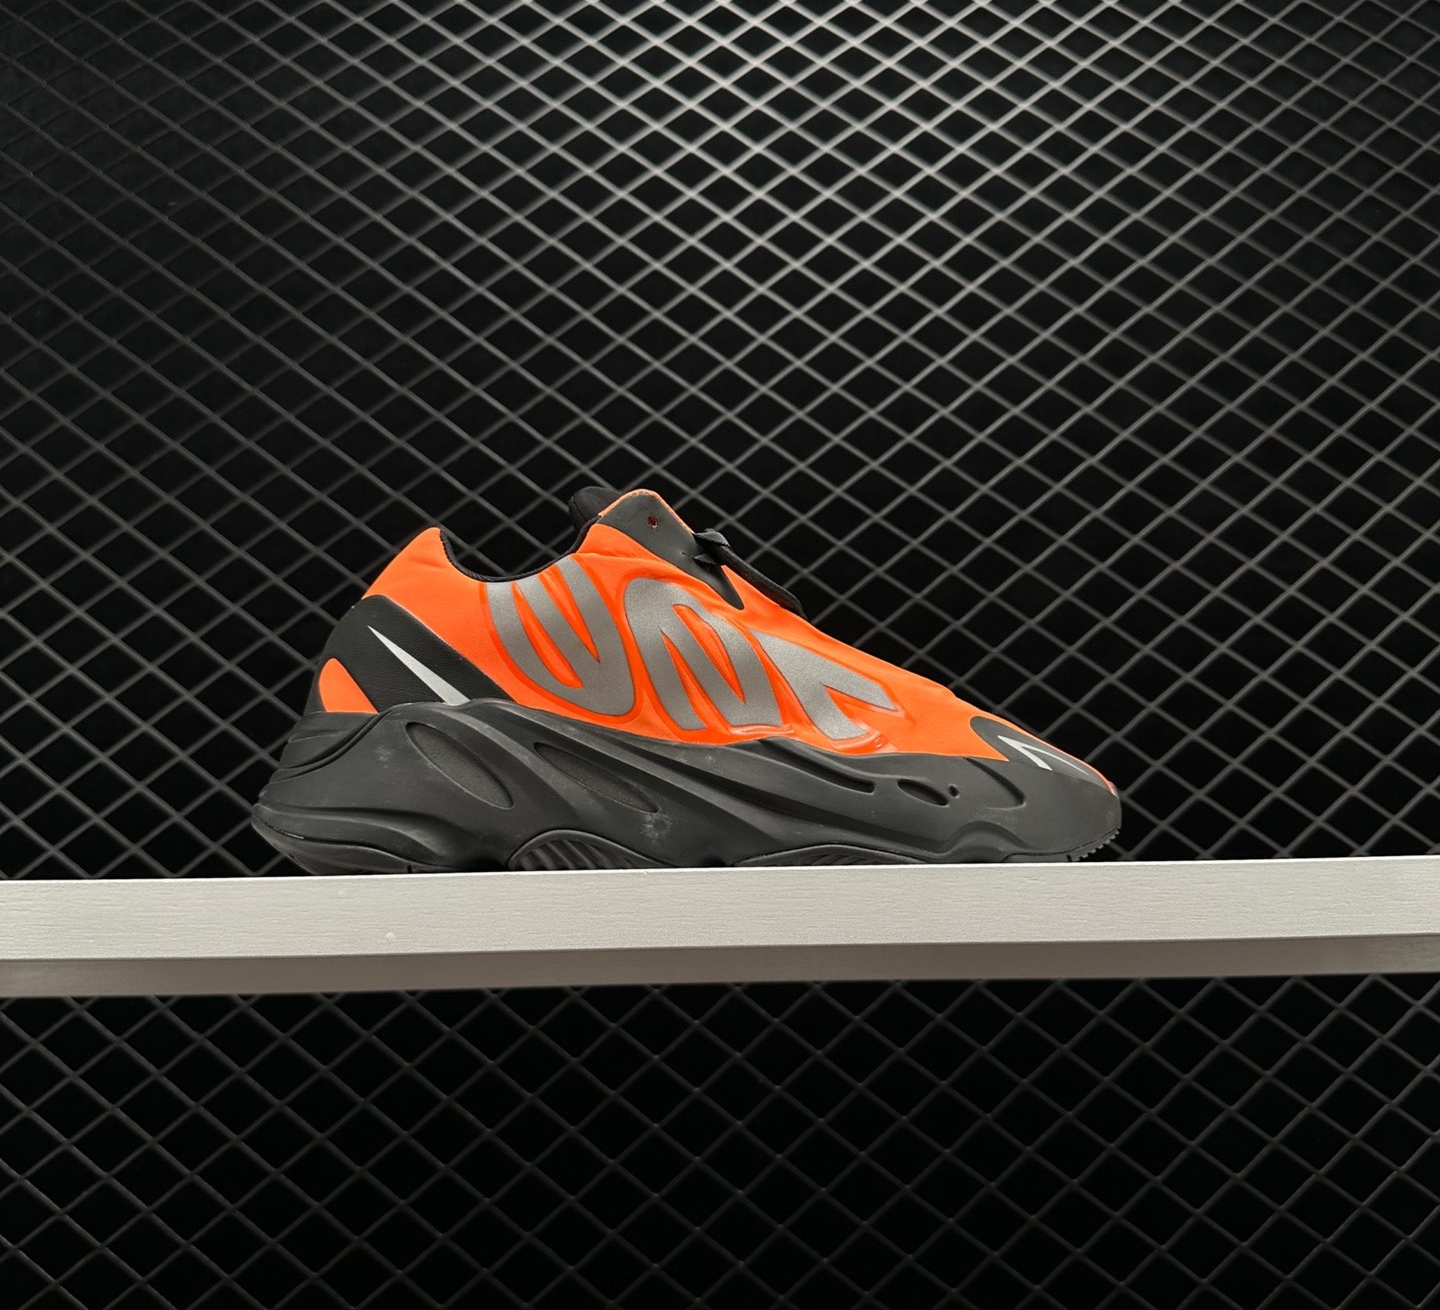 Adidas Yeezy Boost 700 MNVN 'Orange' FV3258 | Limited Edition Sneakers